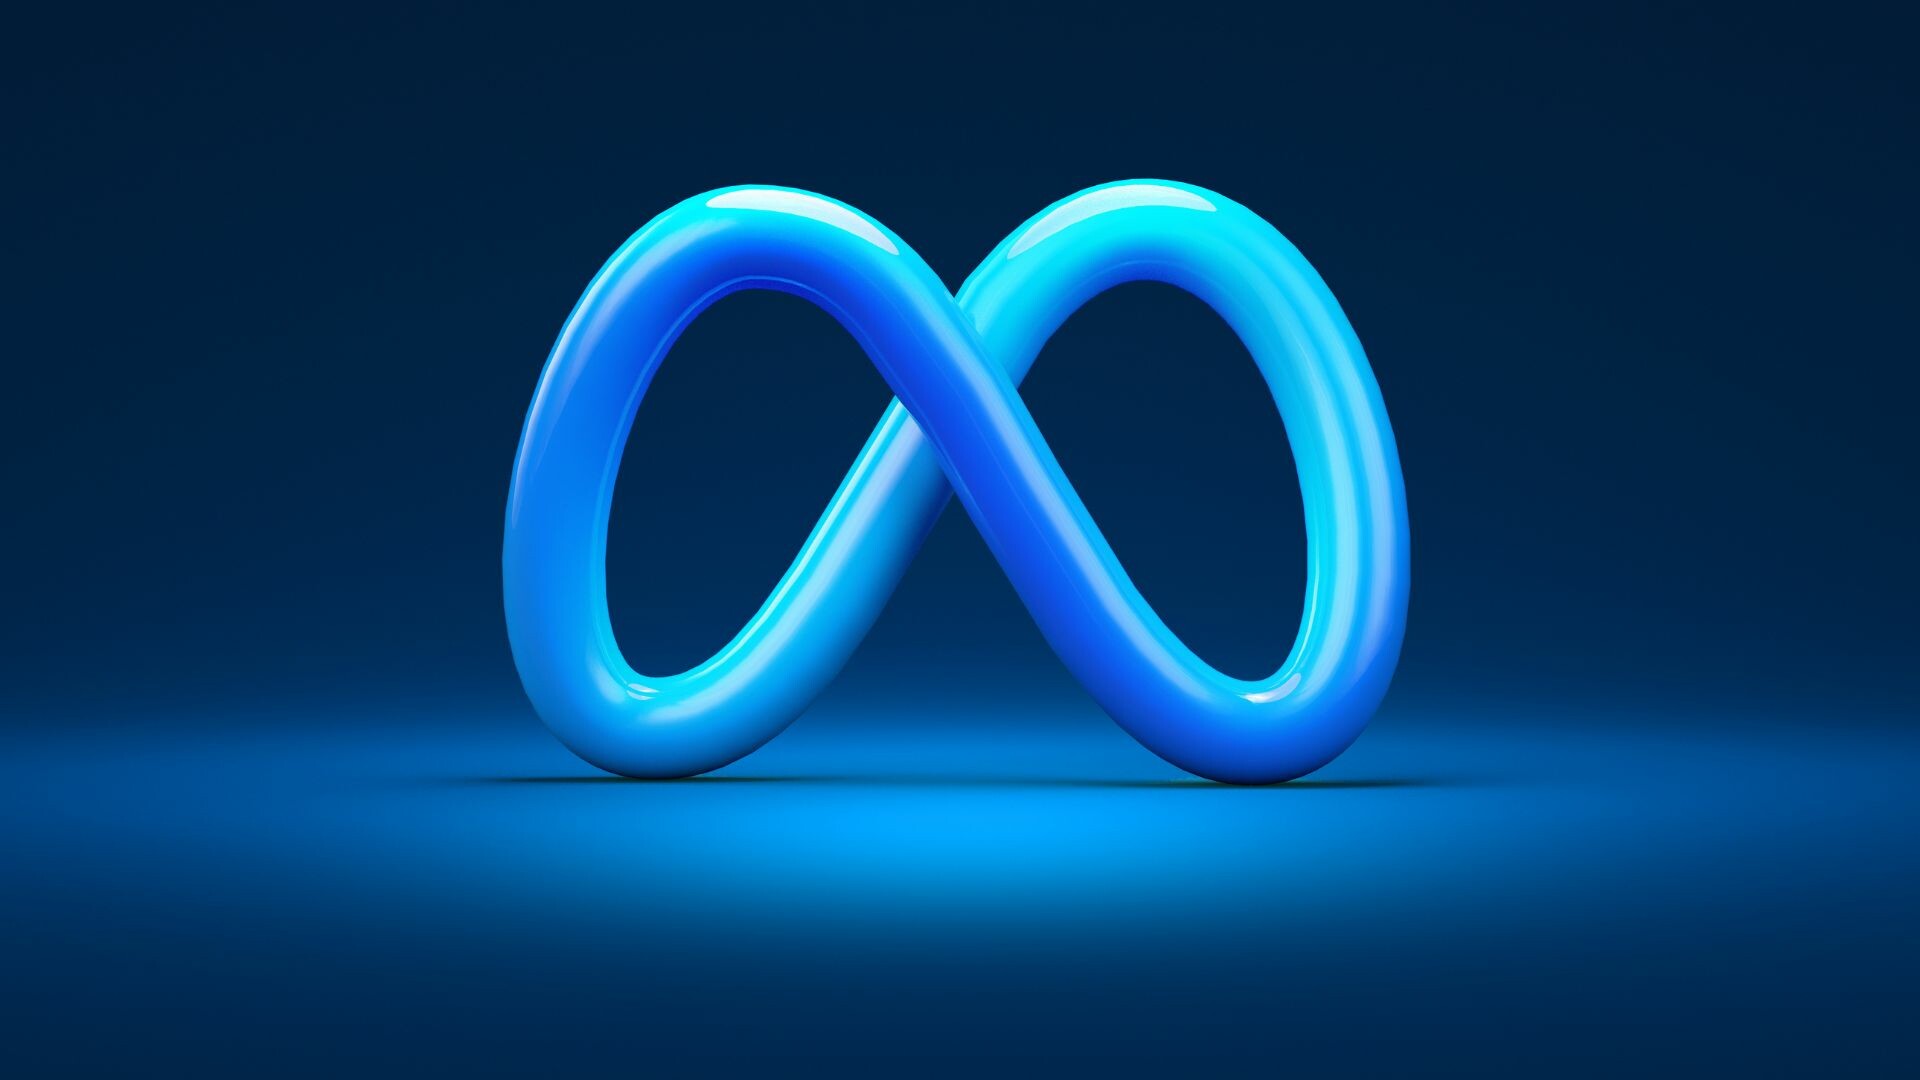 Isolated Meta logo icon in 3D render. Meta, rebrand of Facebook, is a social media company focused on social metaverse, alternative world and VR virtual life for TEAM LEWIS A Week in Review